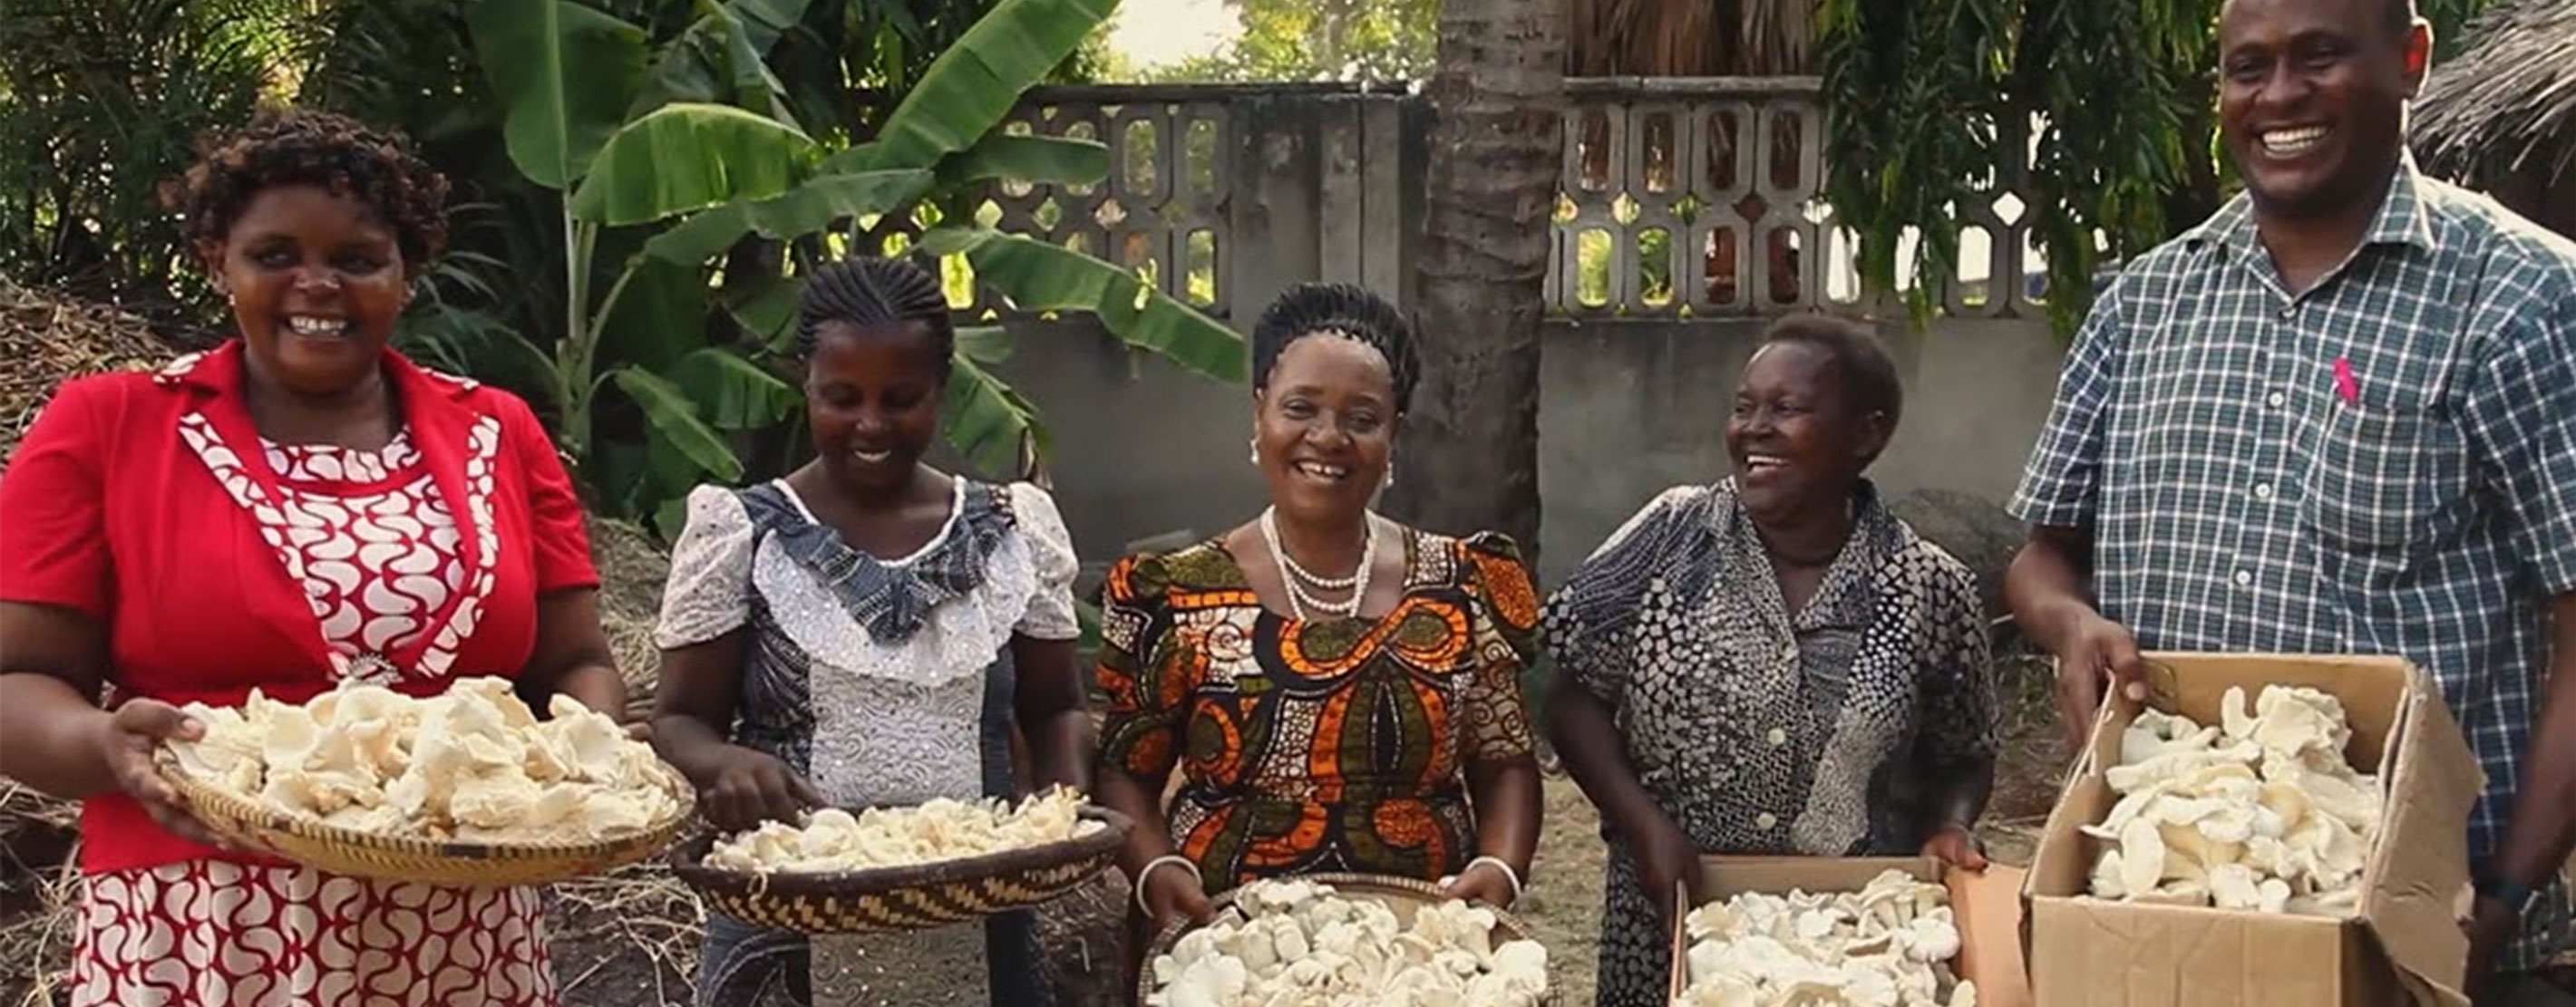 Women In Tanzania With Baskets Of Mushrooms